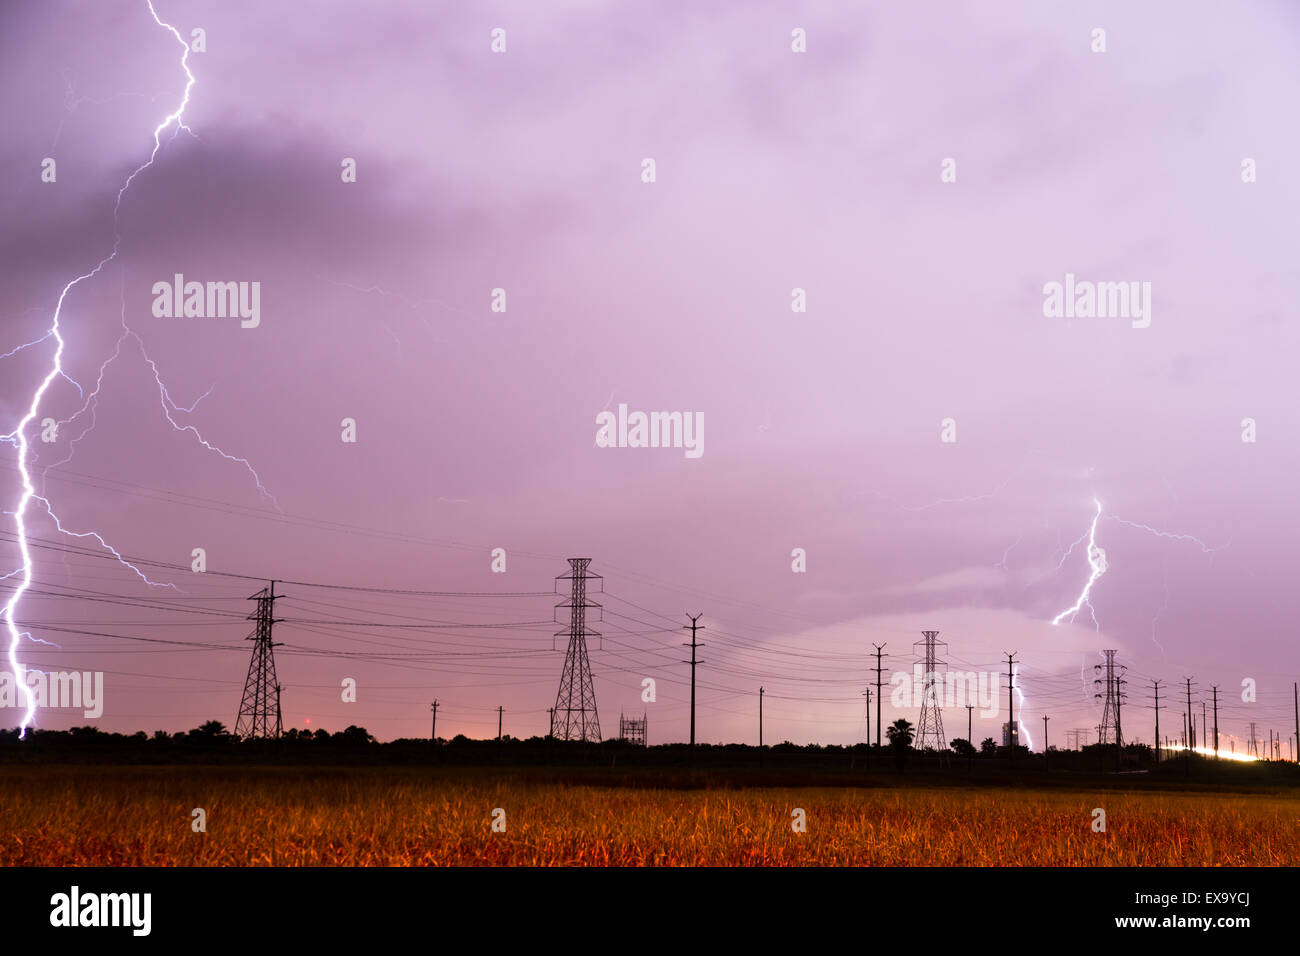 Lightning strikes behind the lines designed to carry it in South Texas Stock Photo